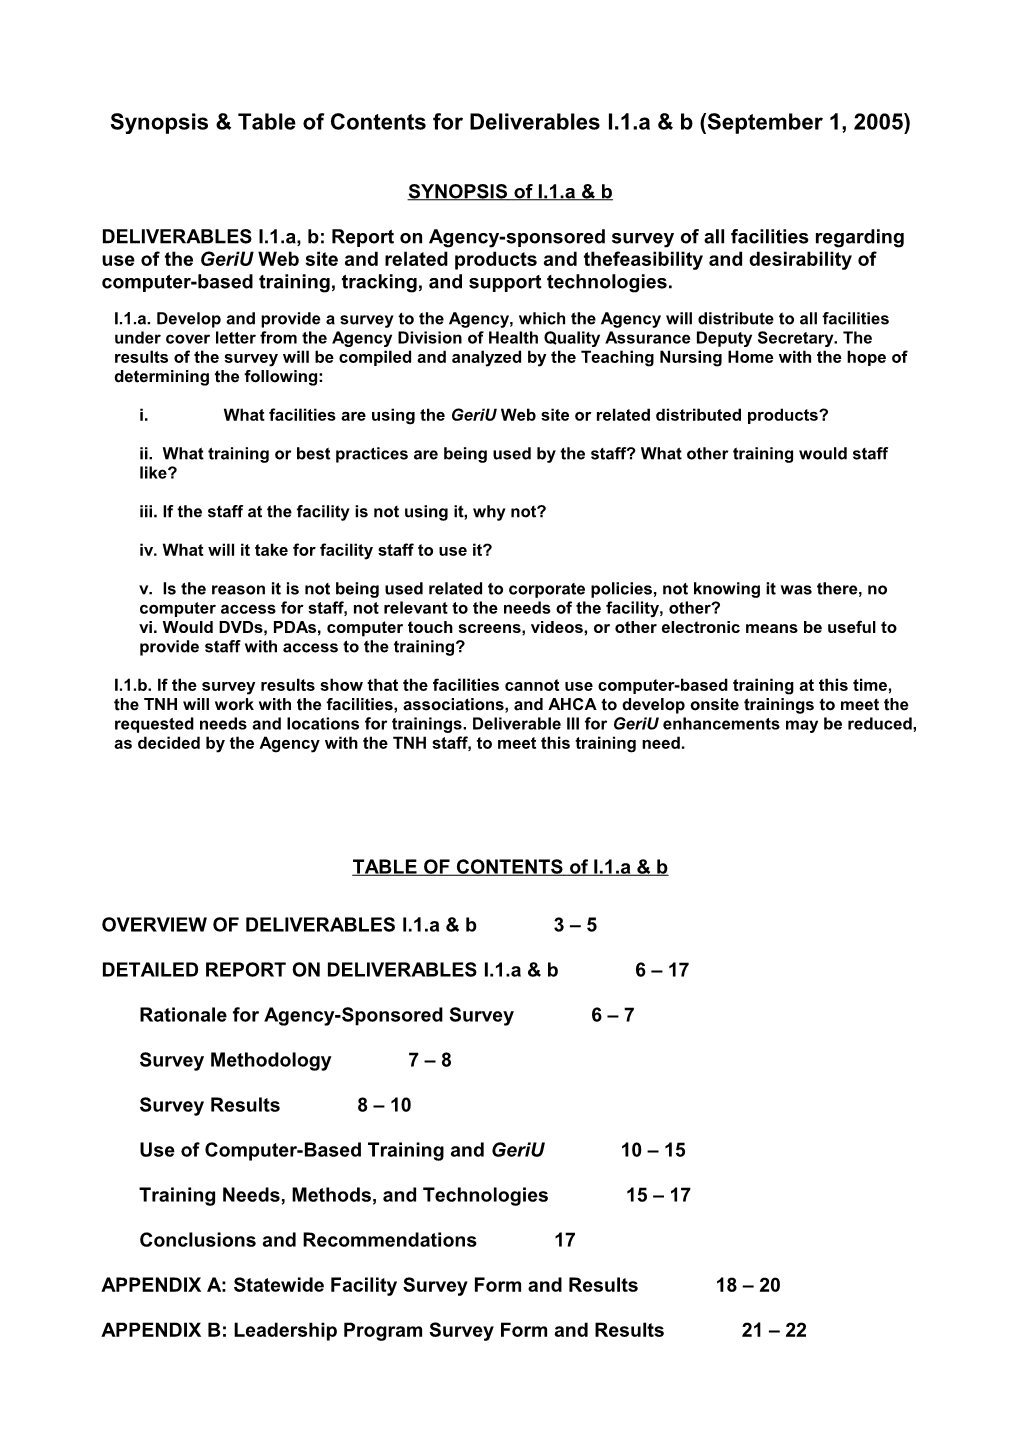 Synopsis & Table of Contents for Deliverables I.1.A & B (September 1, 2005)